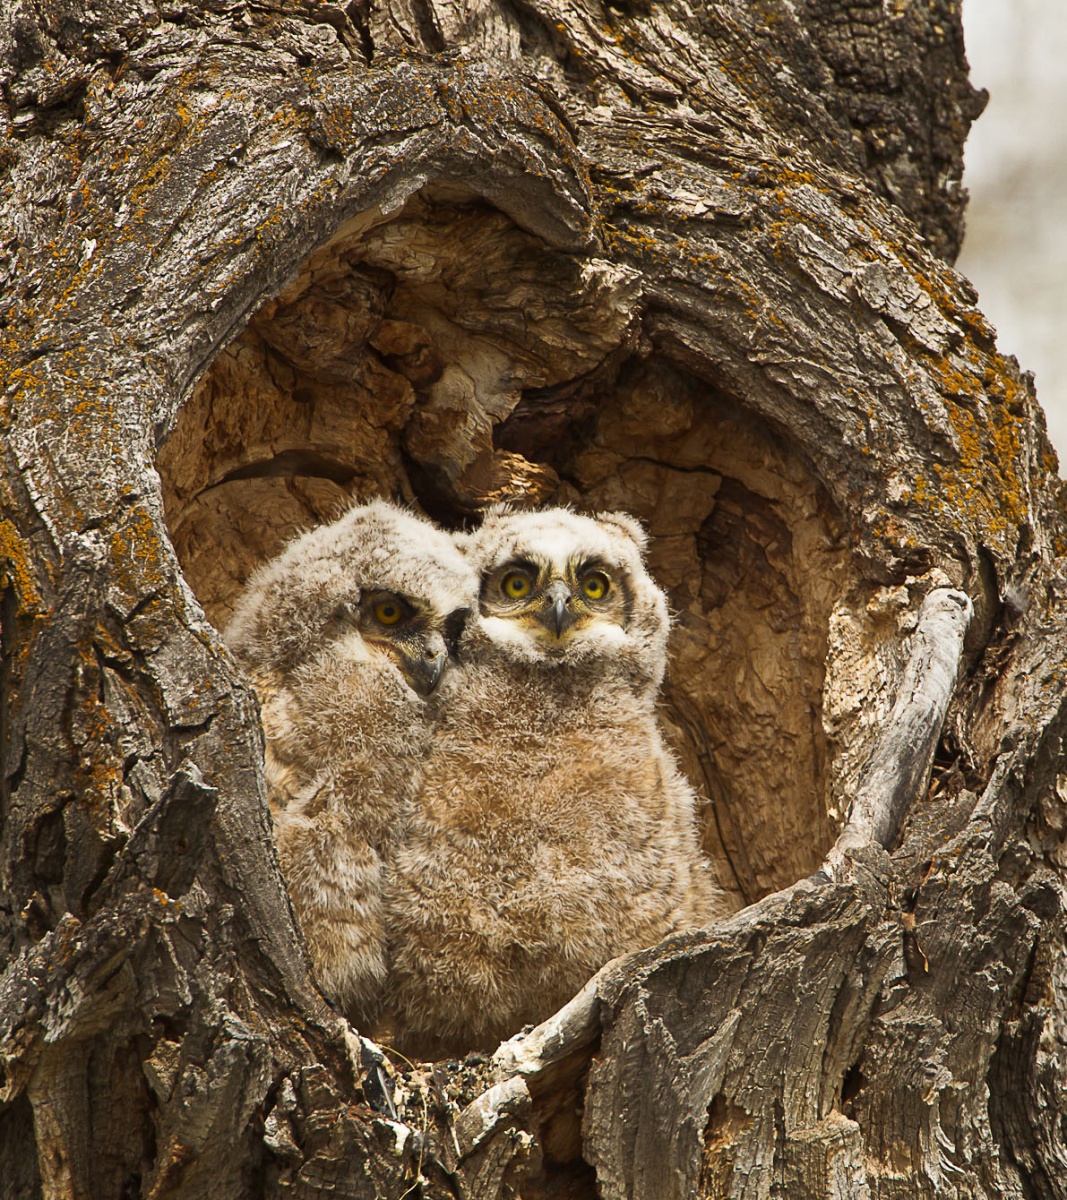 two owlets sit in a tree burrow that's in the shape of a heart